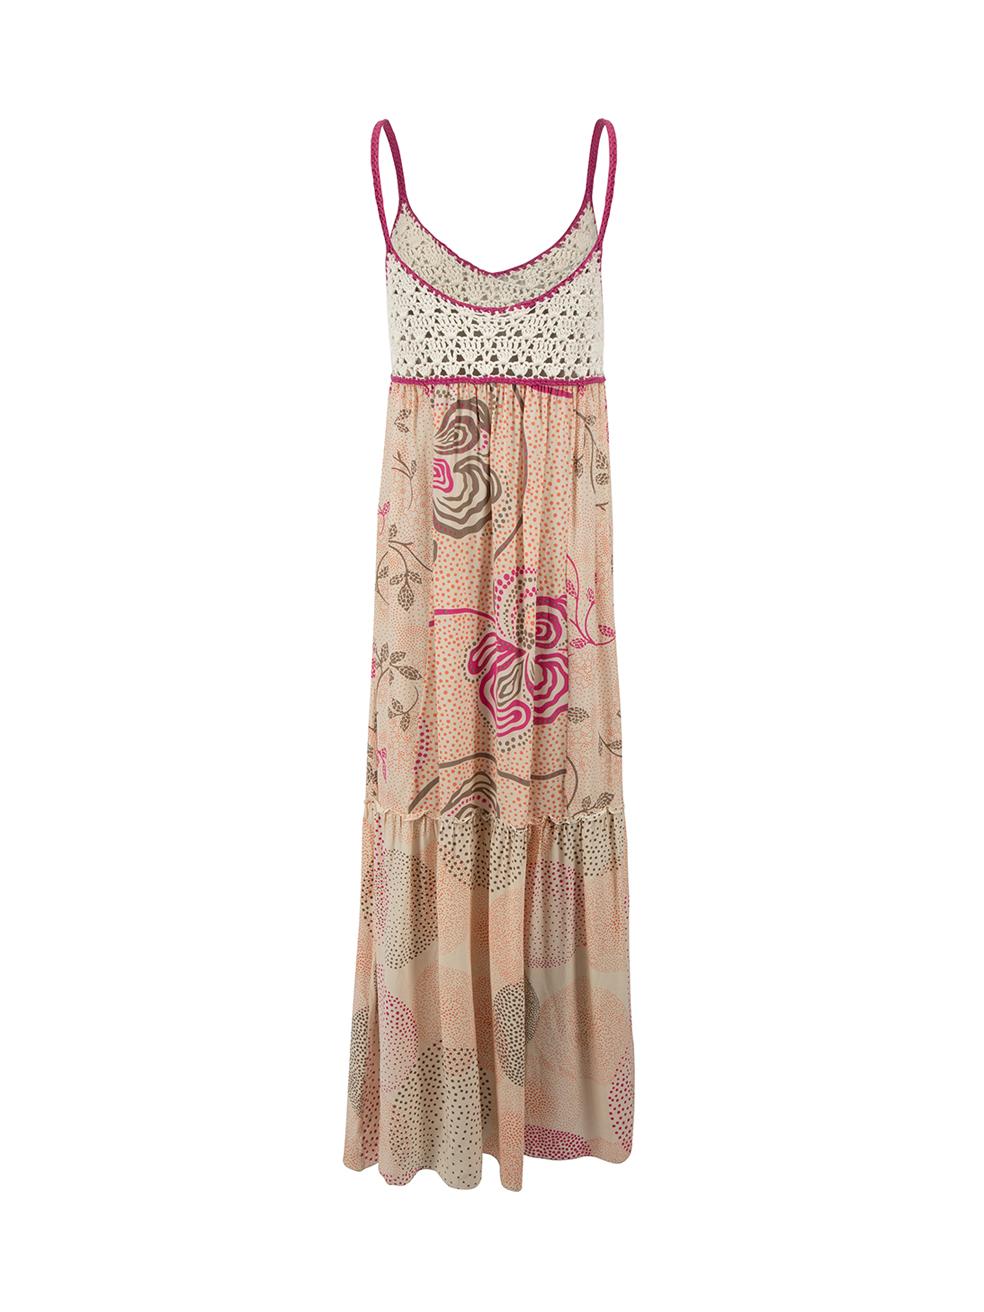 Missoni Floral Printed Crochet Accent Maxi Dress Size M In Good Condition For Sale In London, GB